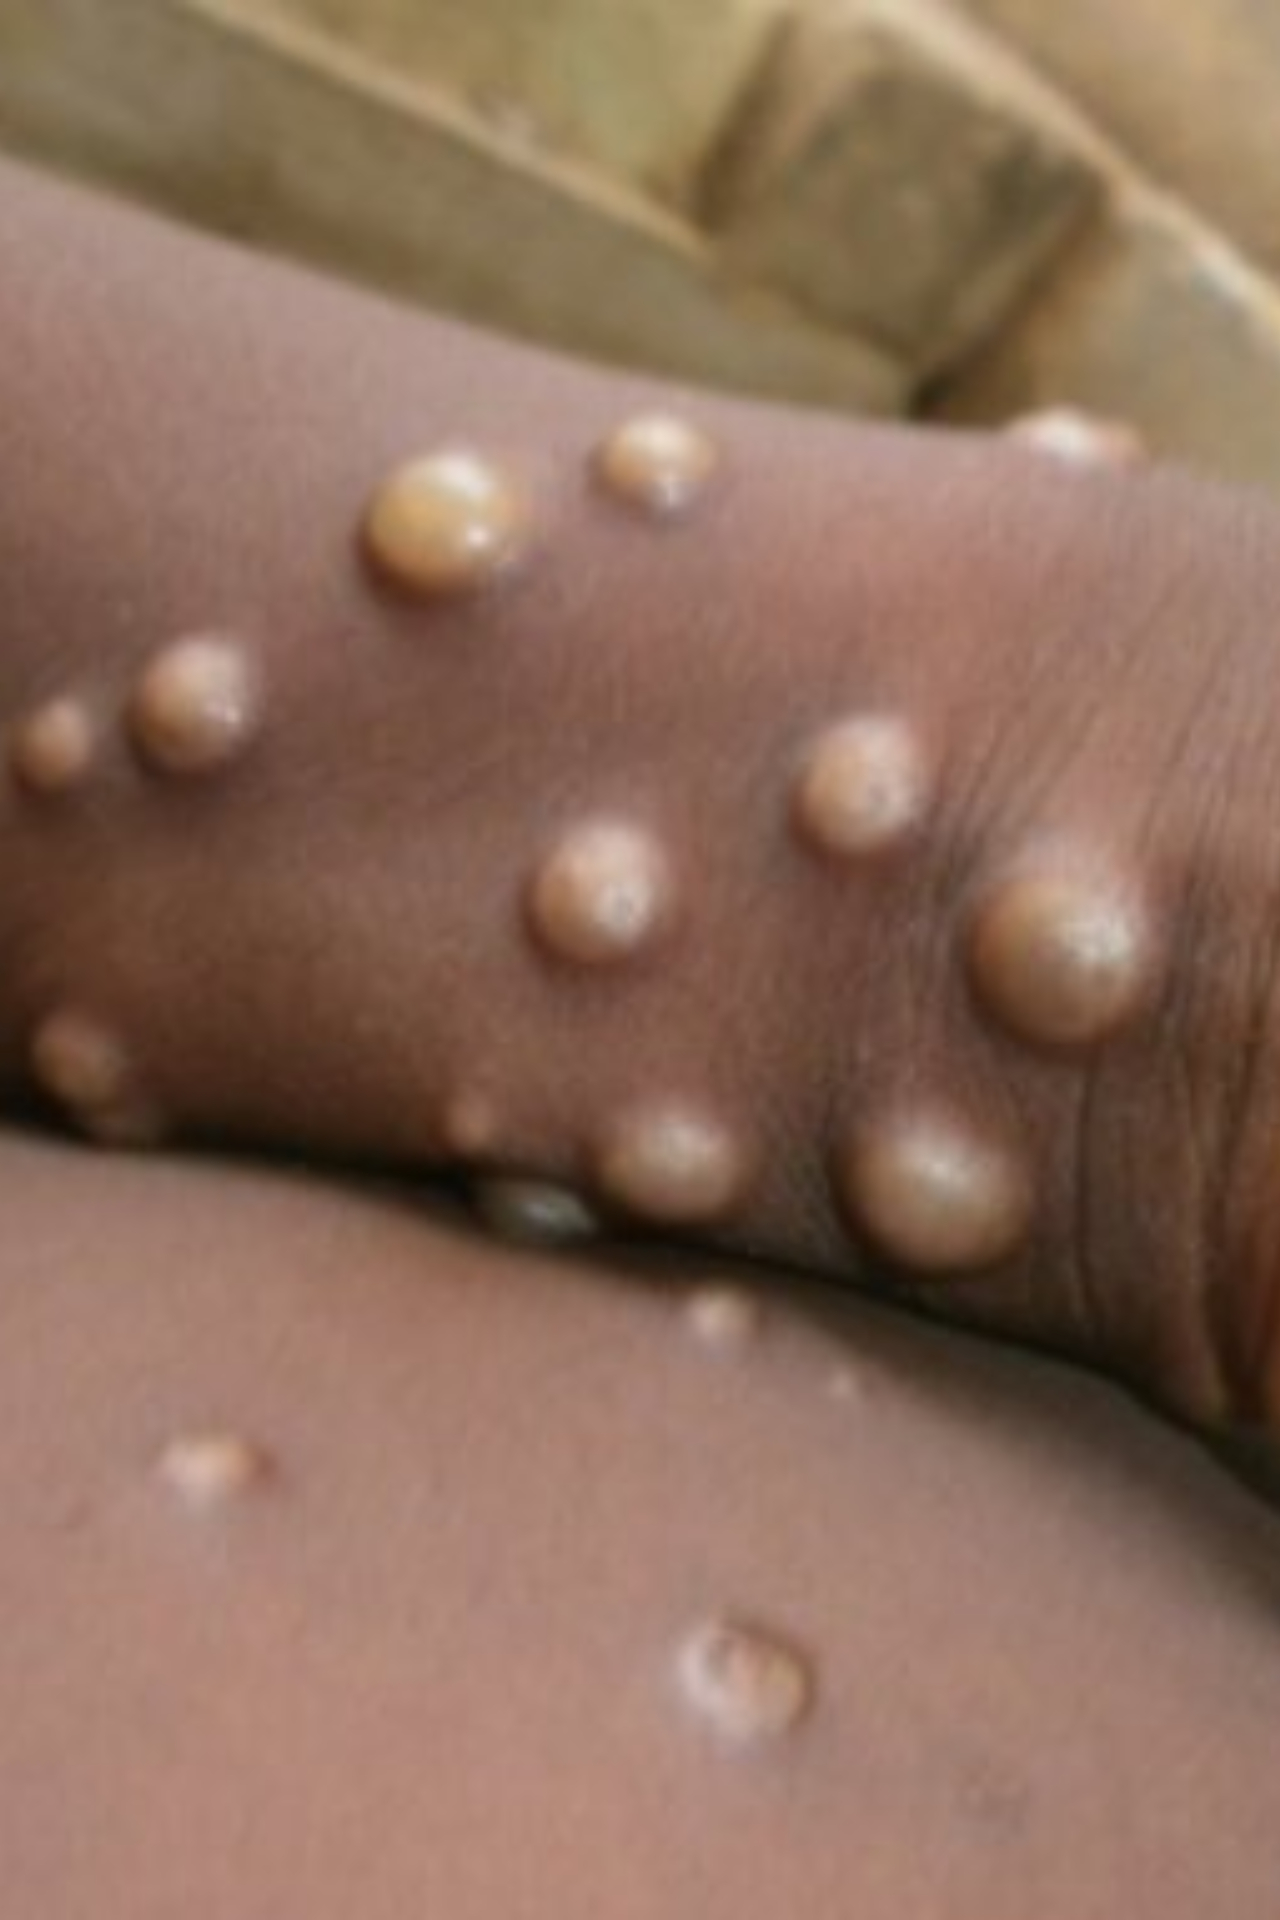 5 Food items that will help in Monkeypox recovery 